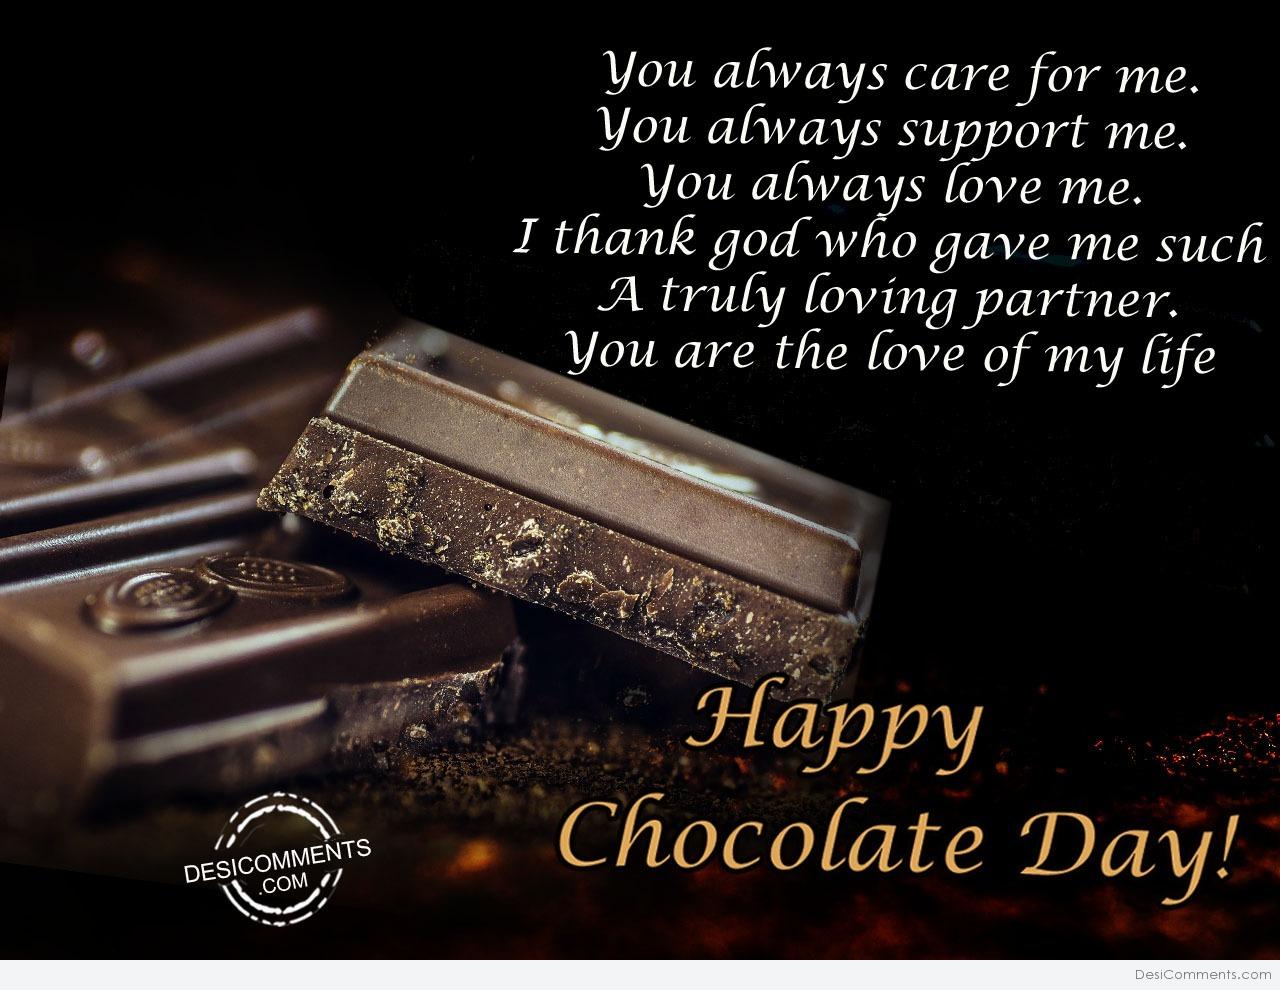 You always care for me, Happy chocolate day - DesiComments.com